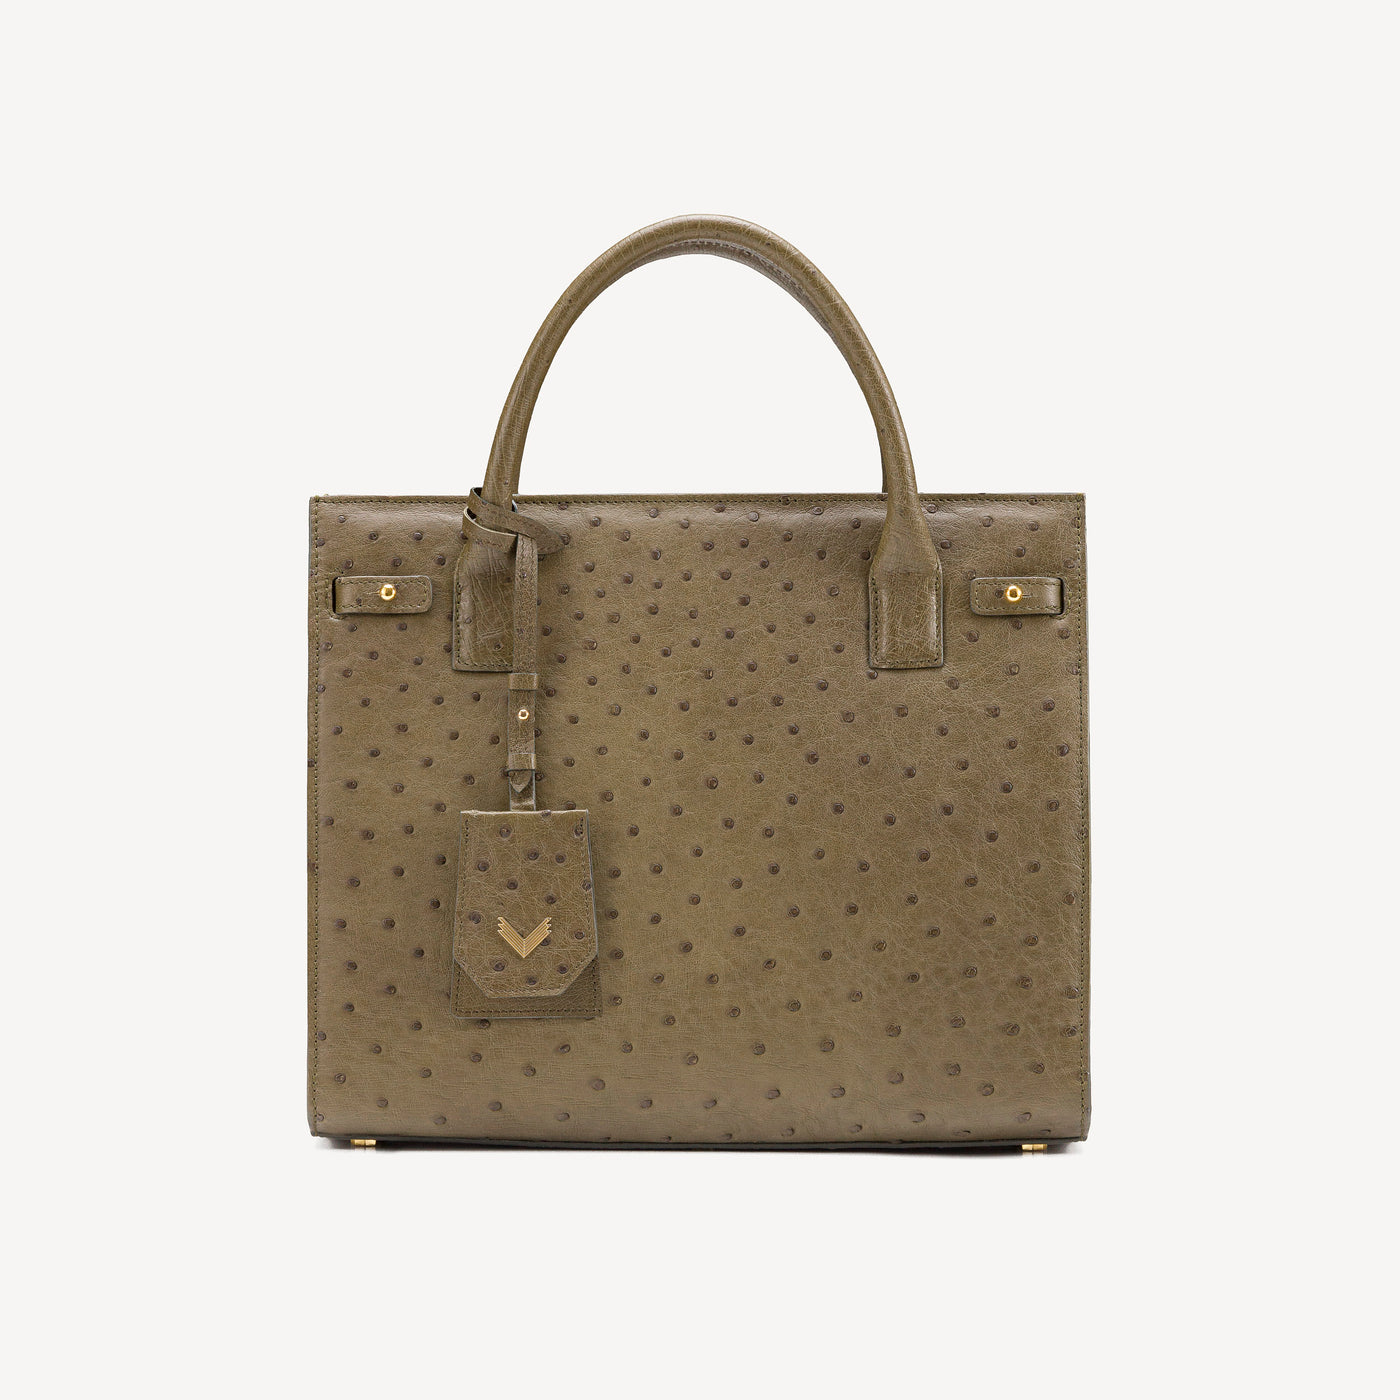 Bag, Ostrich Leather, 14K Yellow Gold VLogo